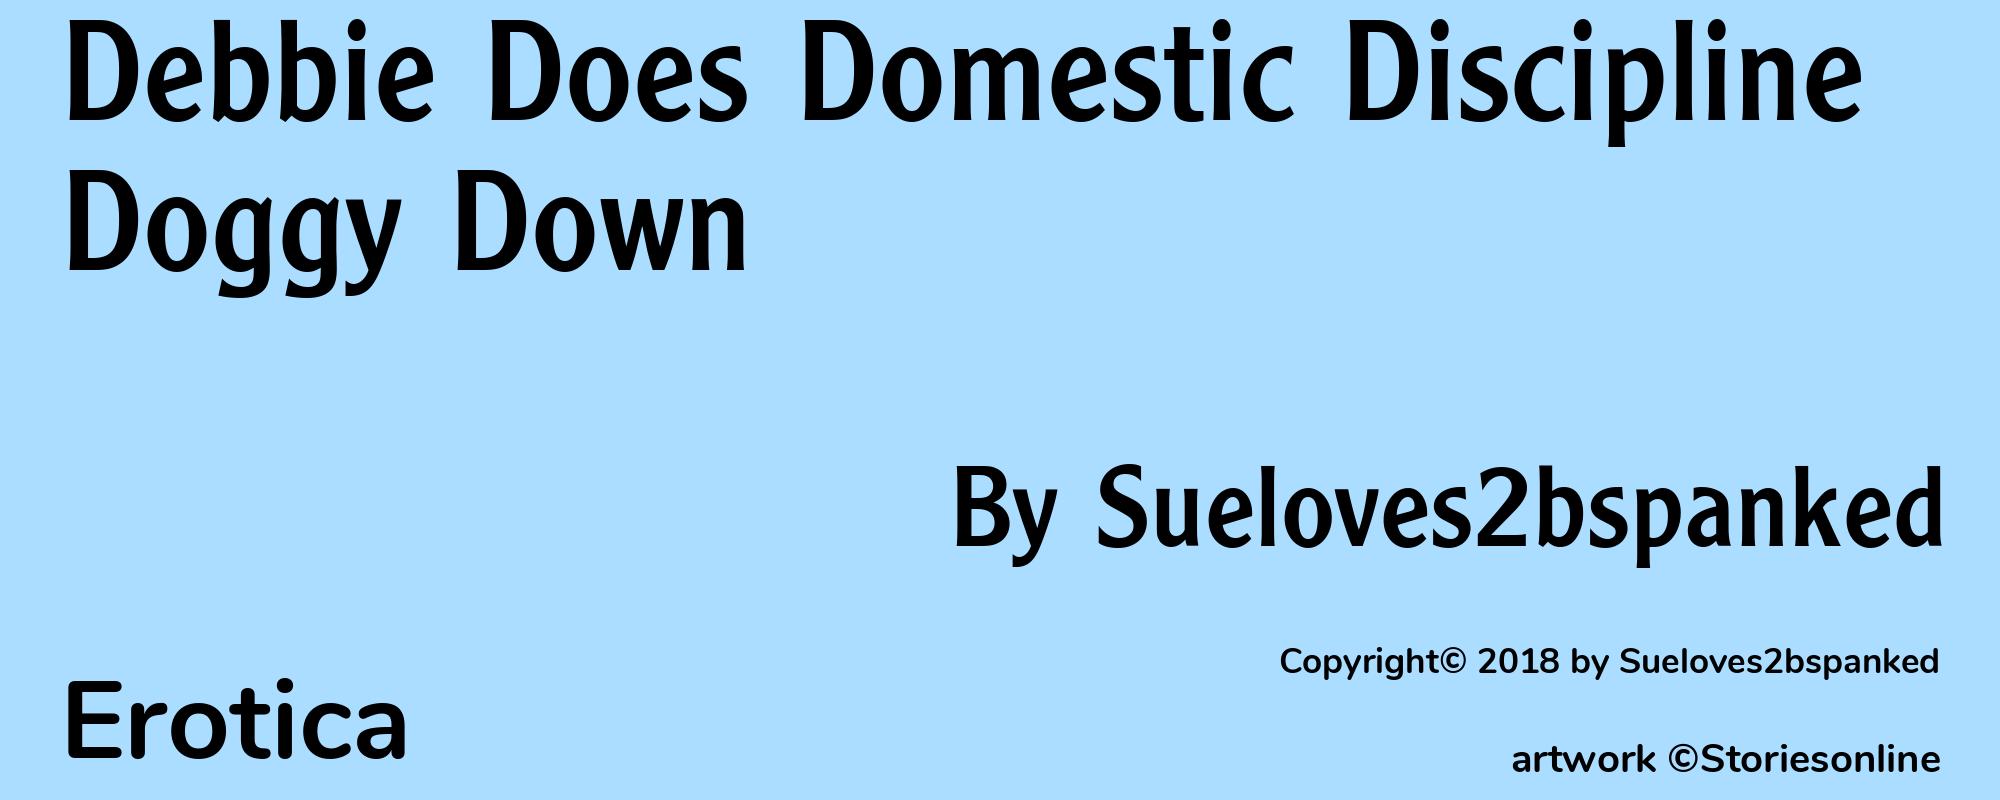 Debbie Does Domestic Discipline Doggy Down - Cover